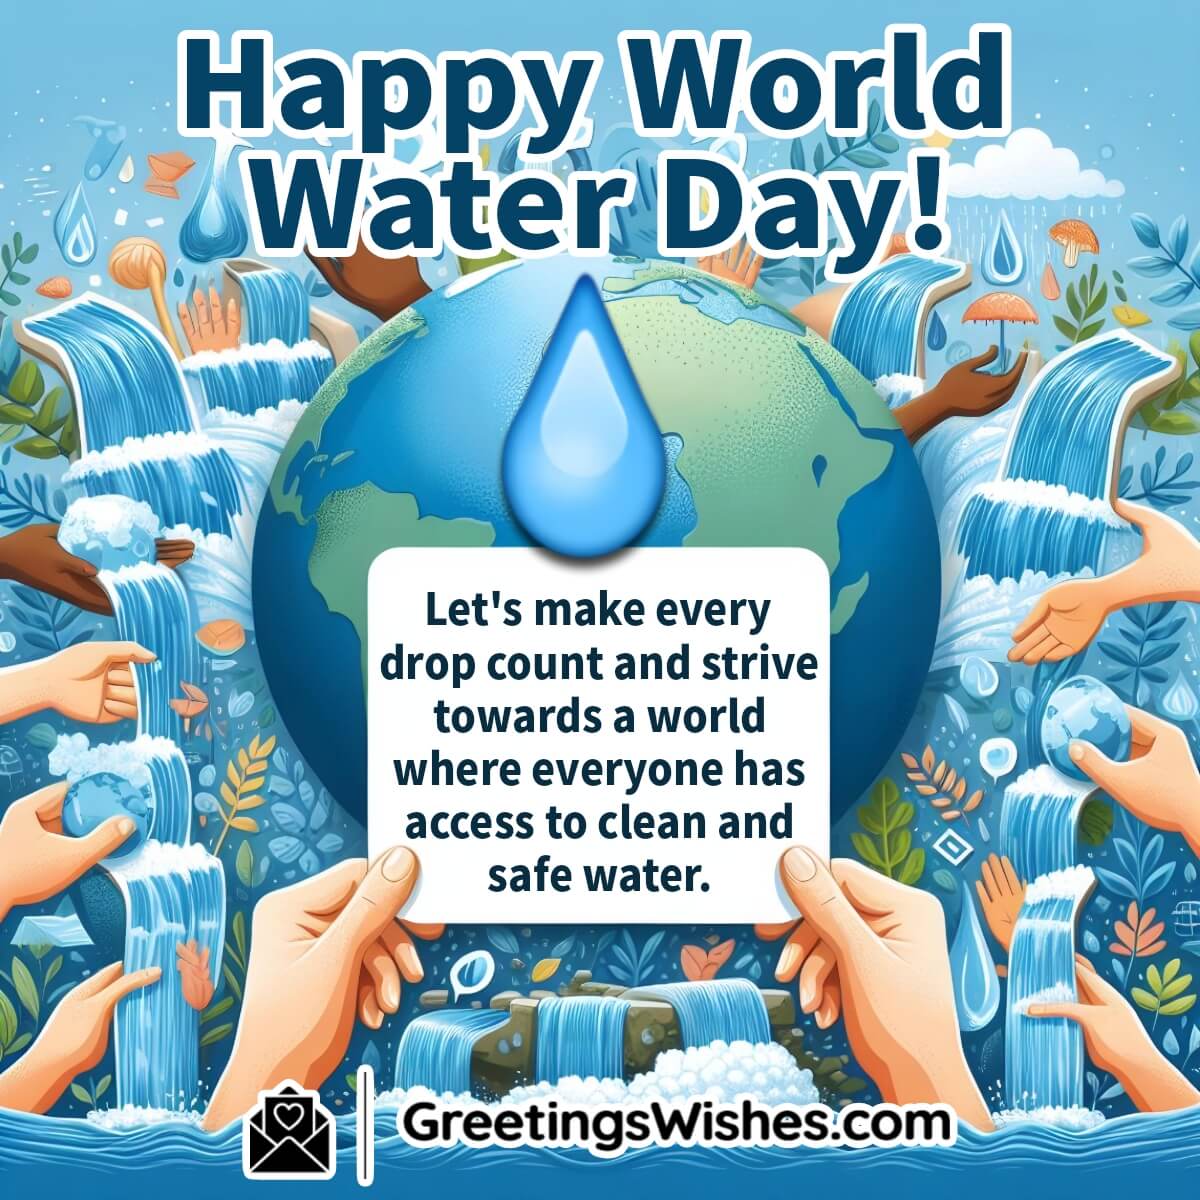 Happy World Water Day Wishes